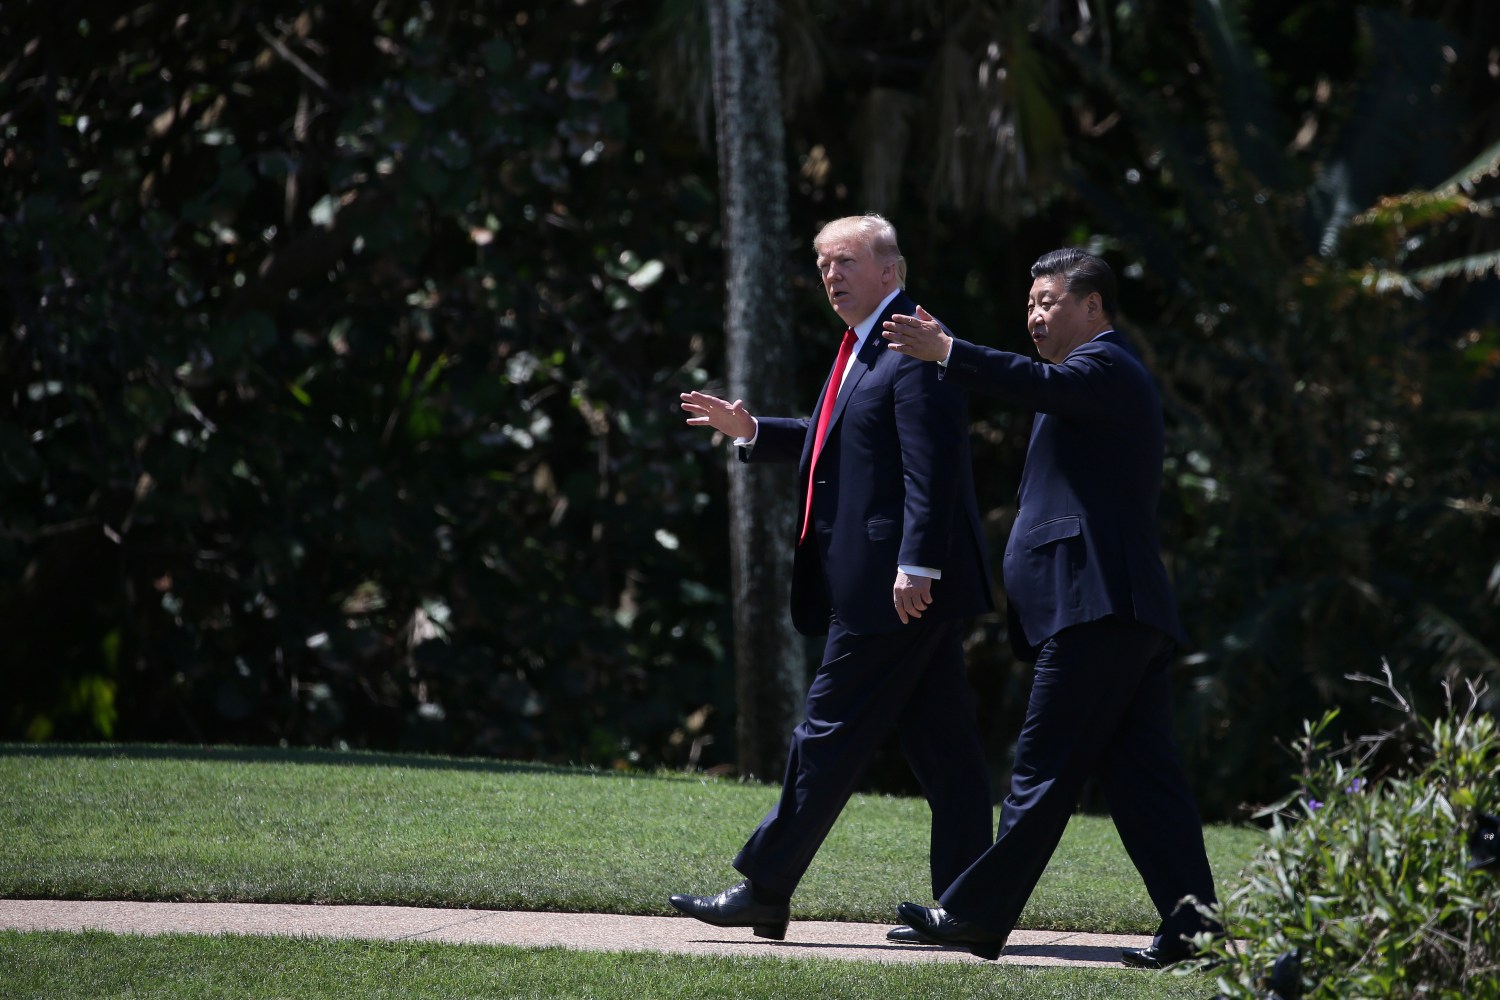 U.S. President Donald Trump and China's President Xi Jinping chat as they walk along the front patio of the Mar-a-Lago estate after a bilateral meeting in Palm Beach, Florida, U.S., April 7, 2017. REUTERS/Carlos Barria - RTX34M5B